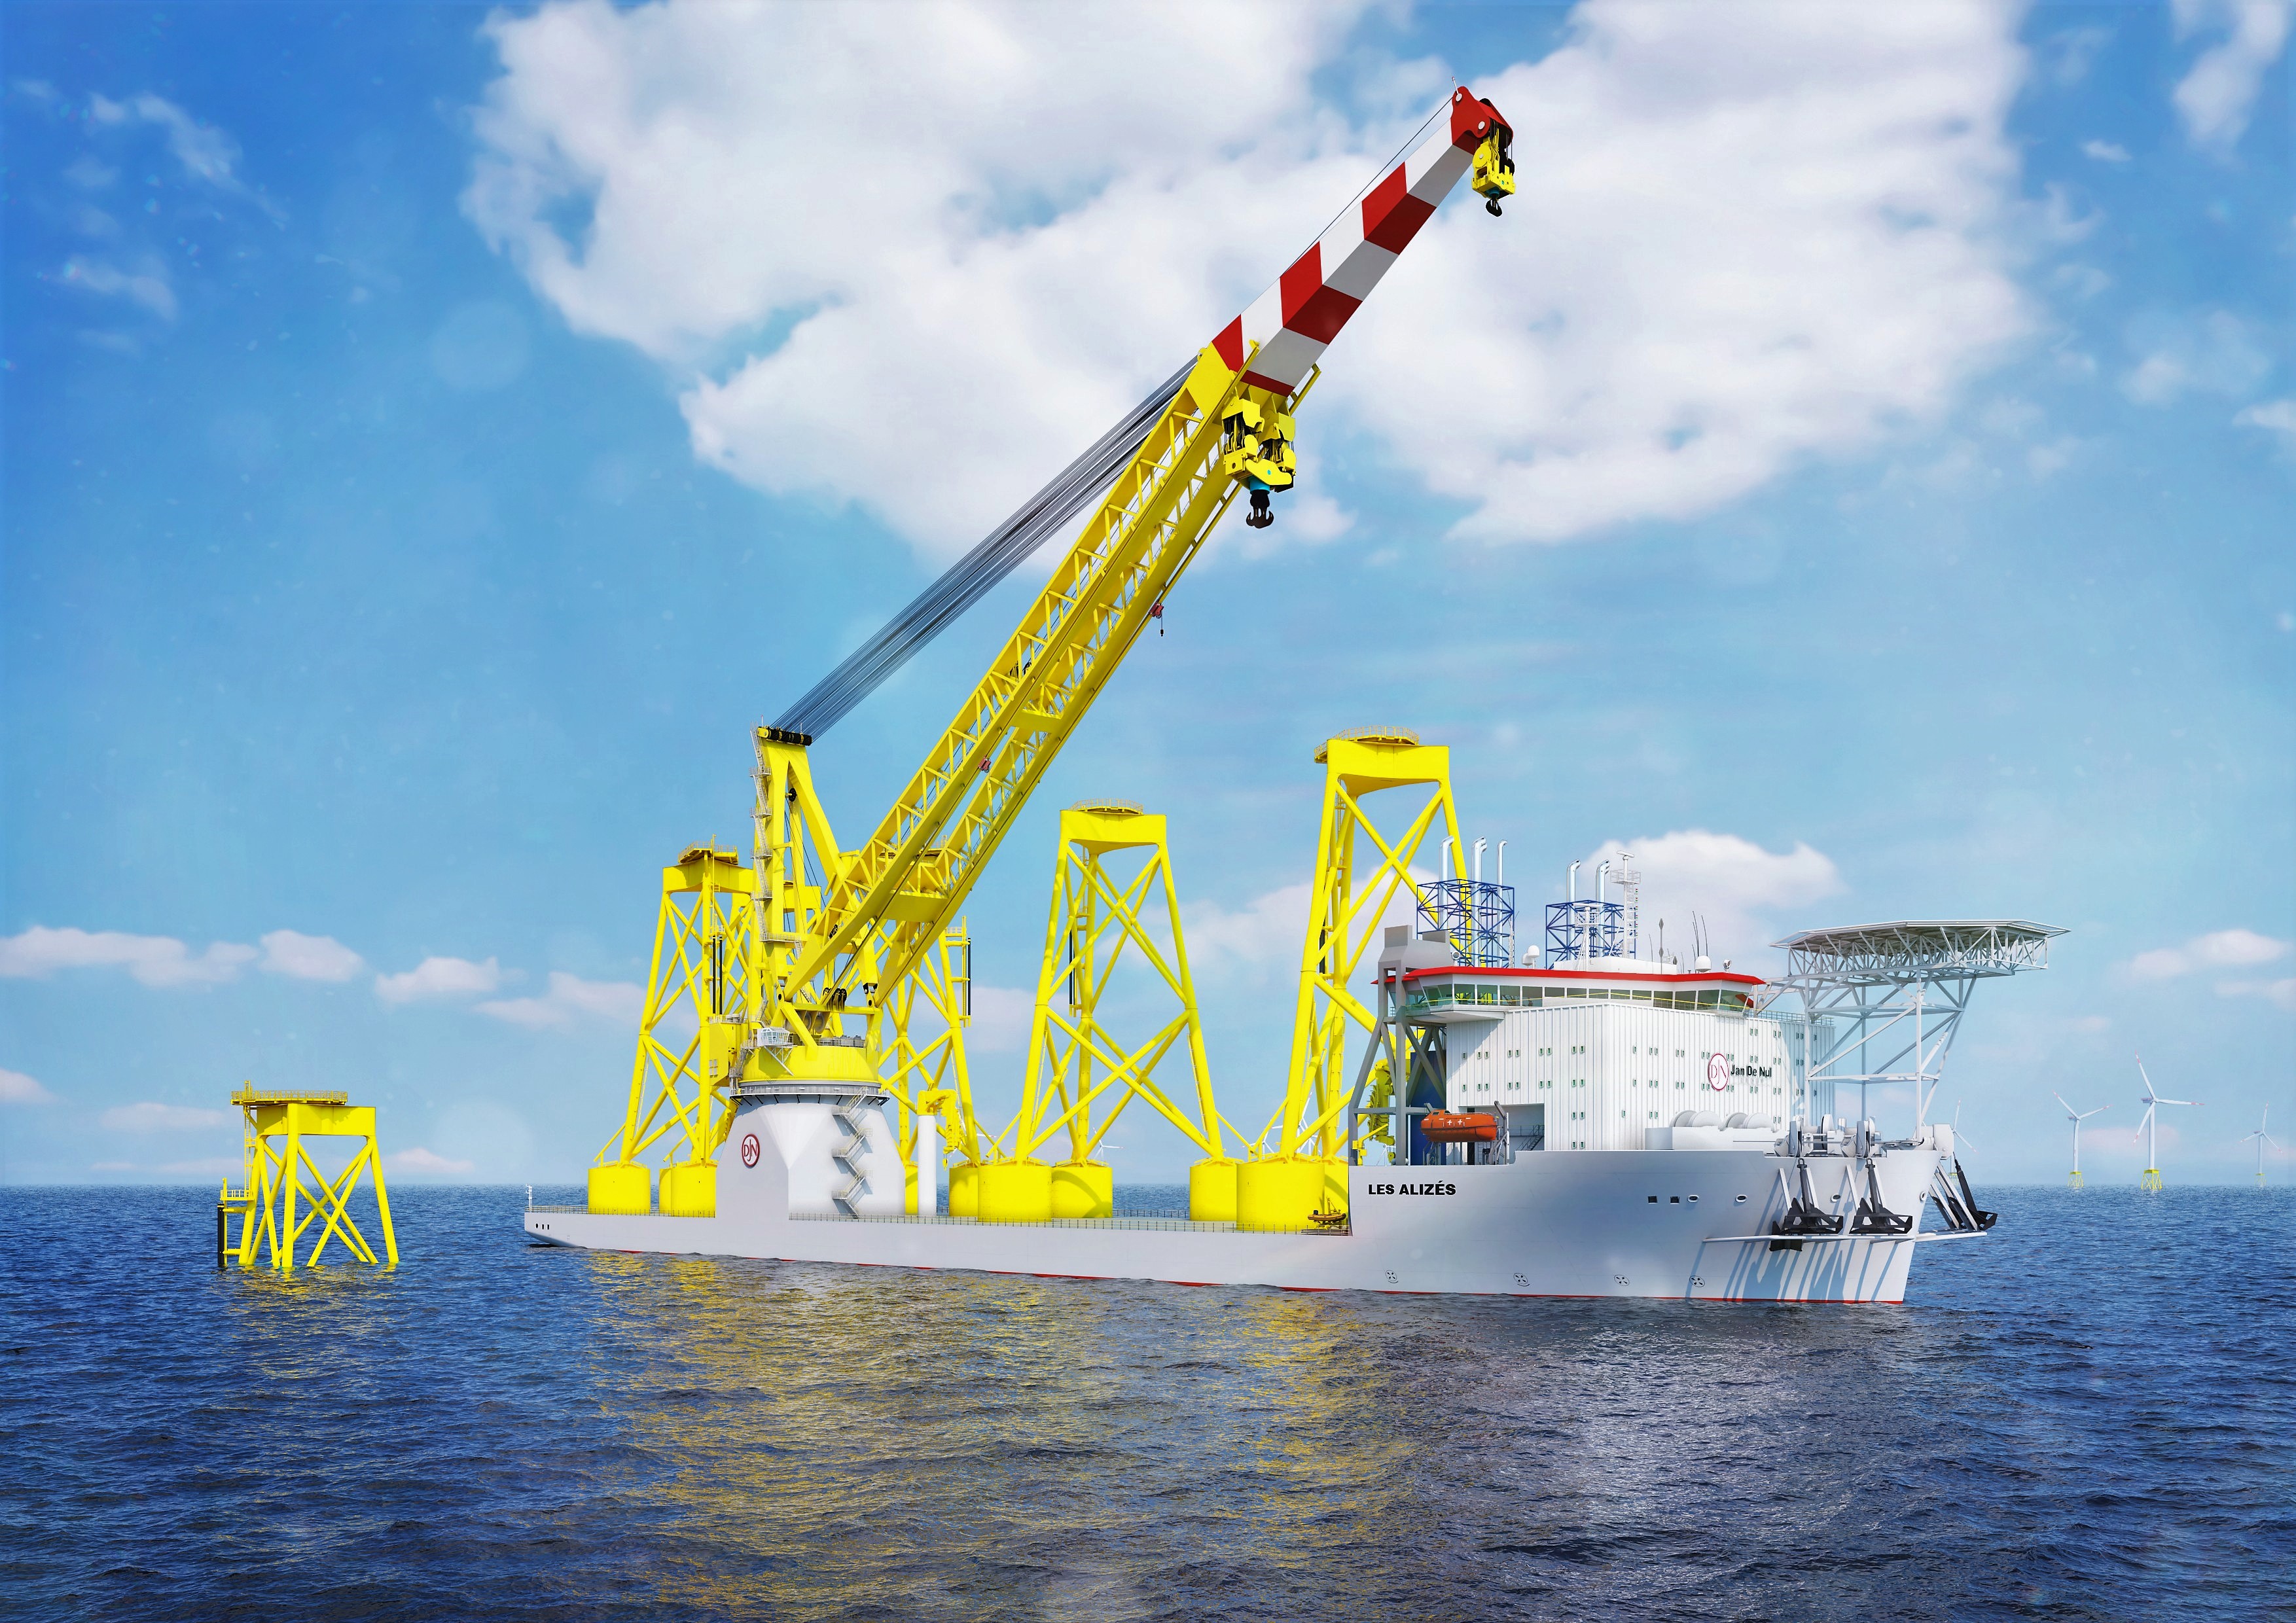 Rendering of the Les Alizés vessel at sea with a lifted crane